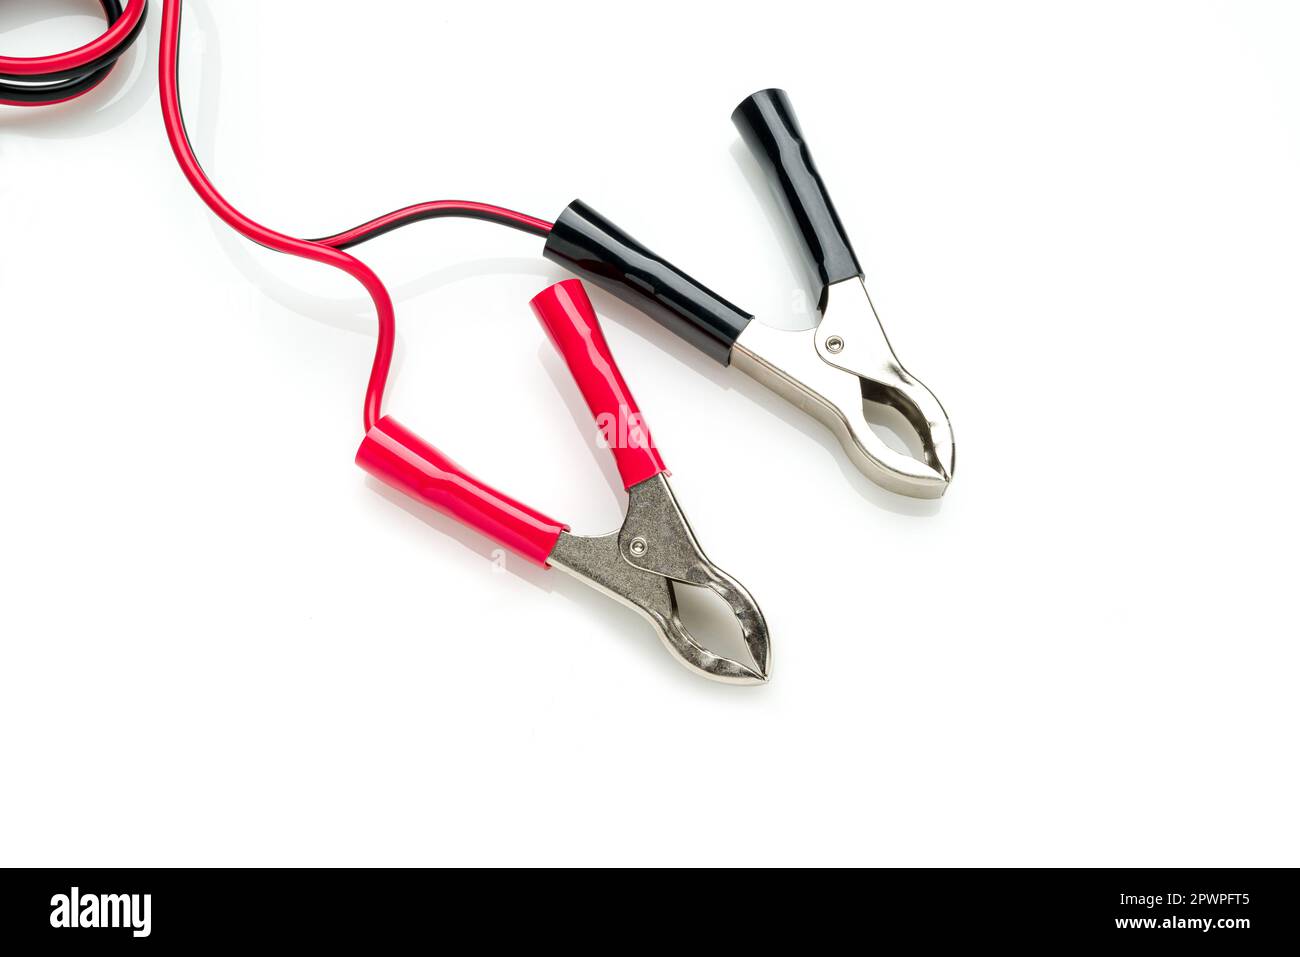 Red and black clip-on connecting and charging cable for 12 Volt battery isolated on white background Stock Photo